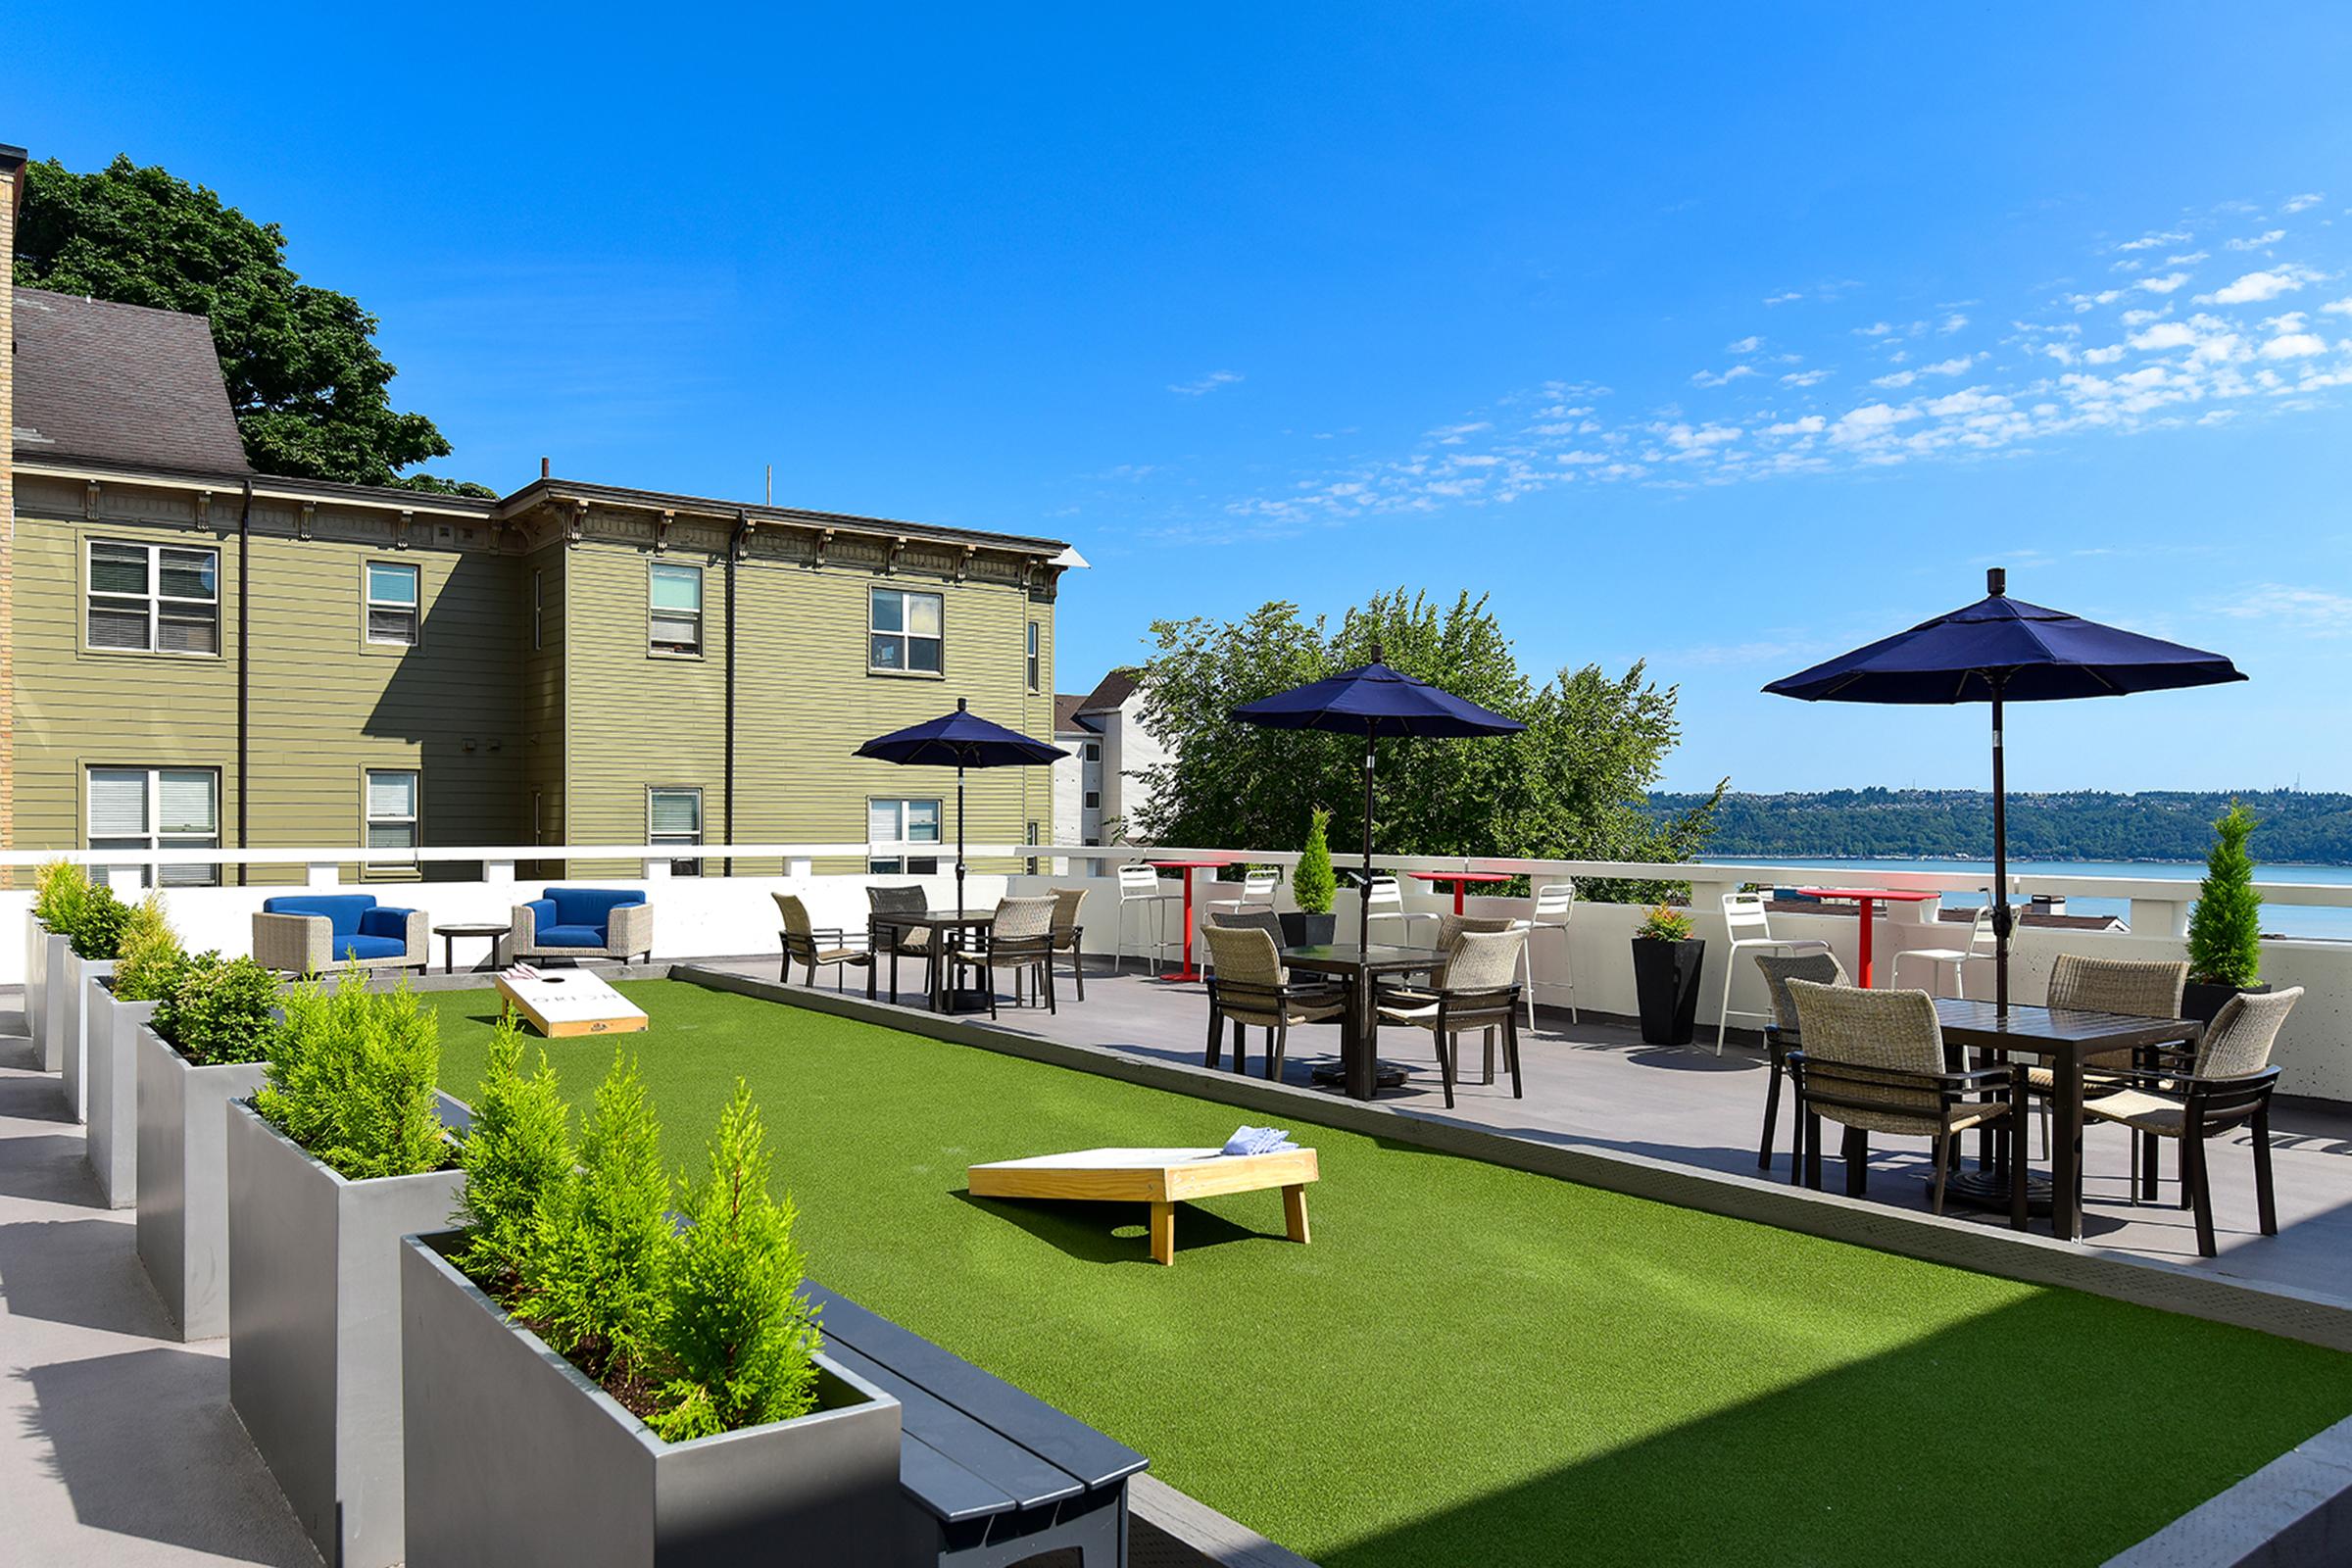 1 BR Apartments in Tacoma WA - Orion - Sundeck with Corn Hole, Dining Areas, Lounge Seating, and a View of the Water